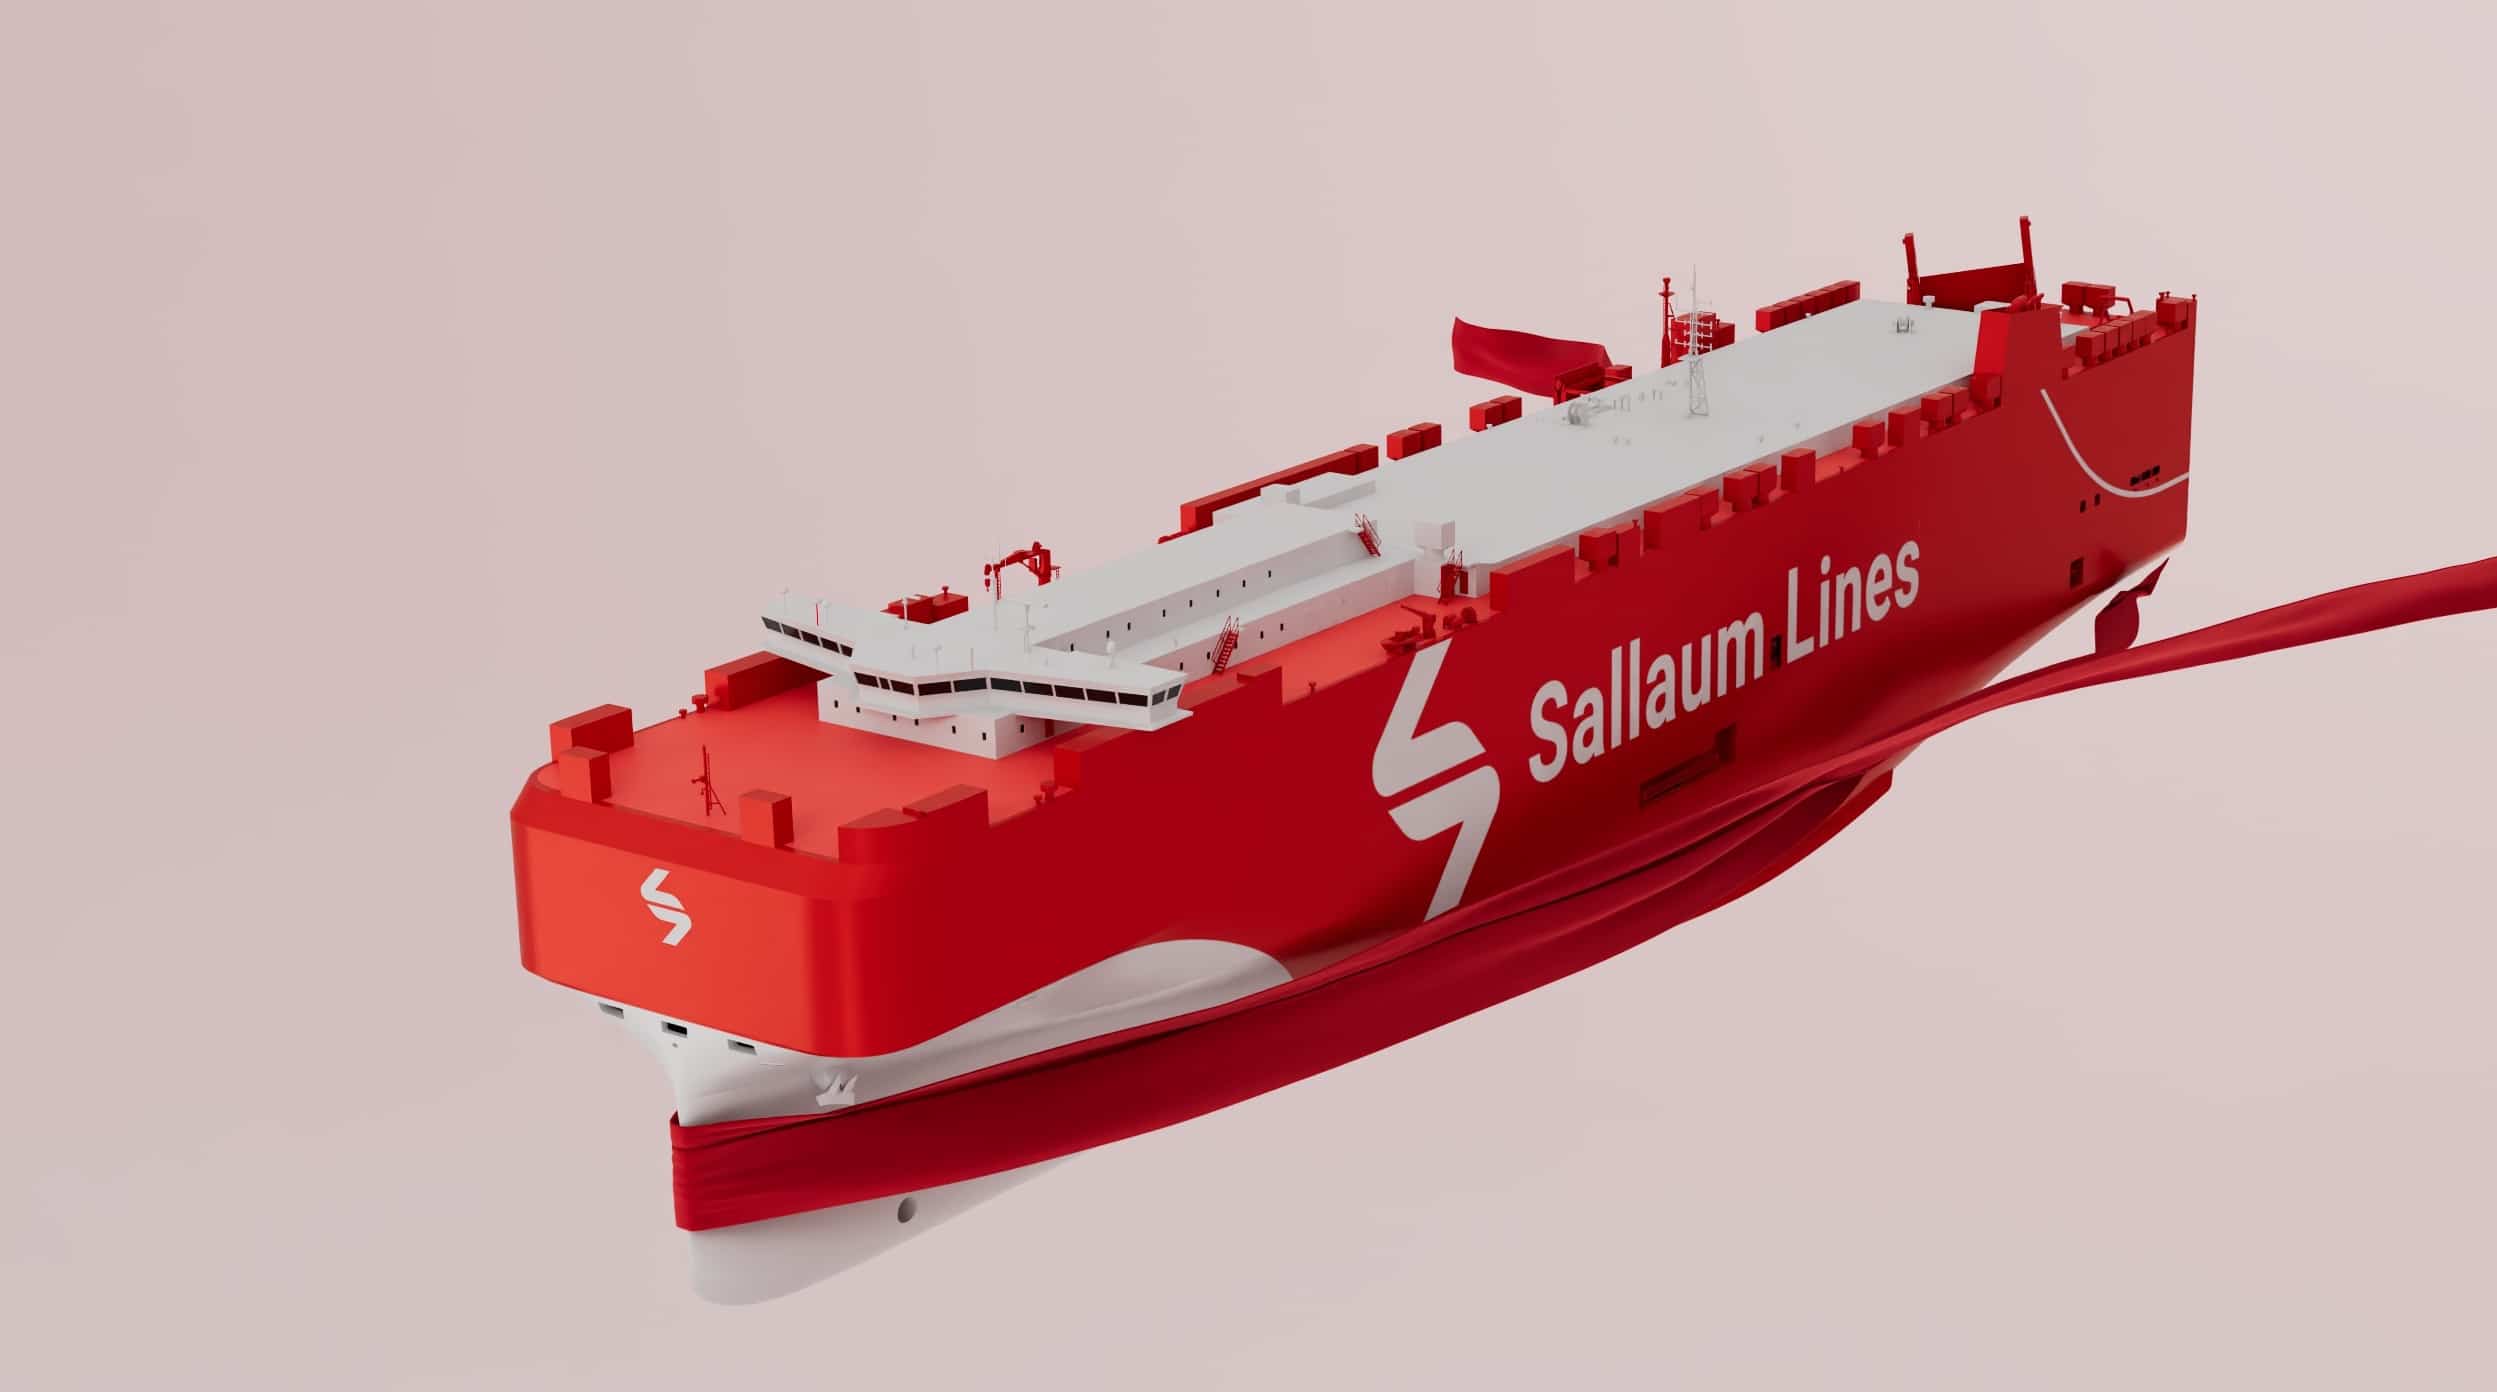 Green Vessels By 2026, ZeroEmission Shipping By 2050 Sallaum Lines